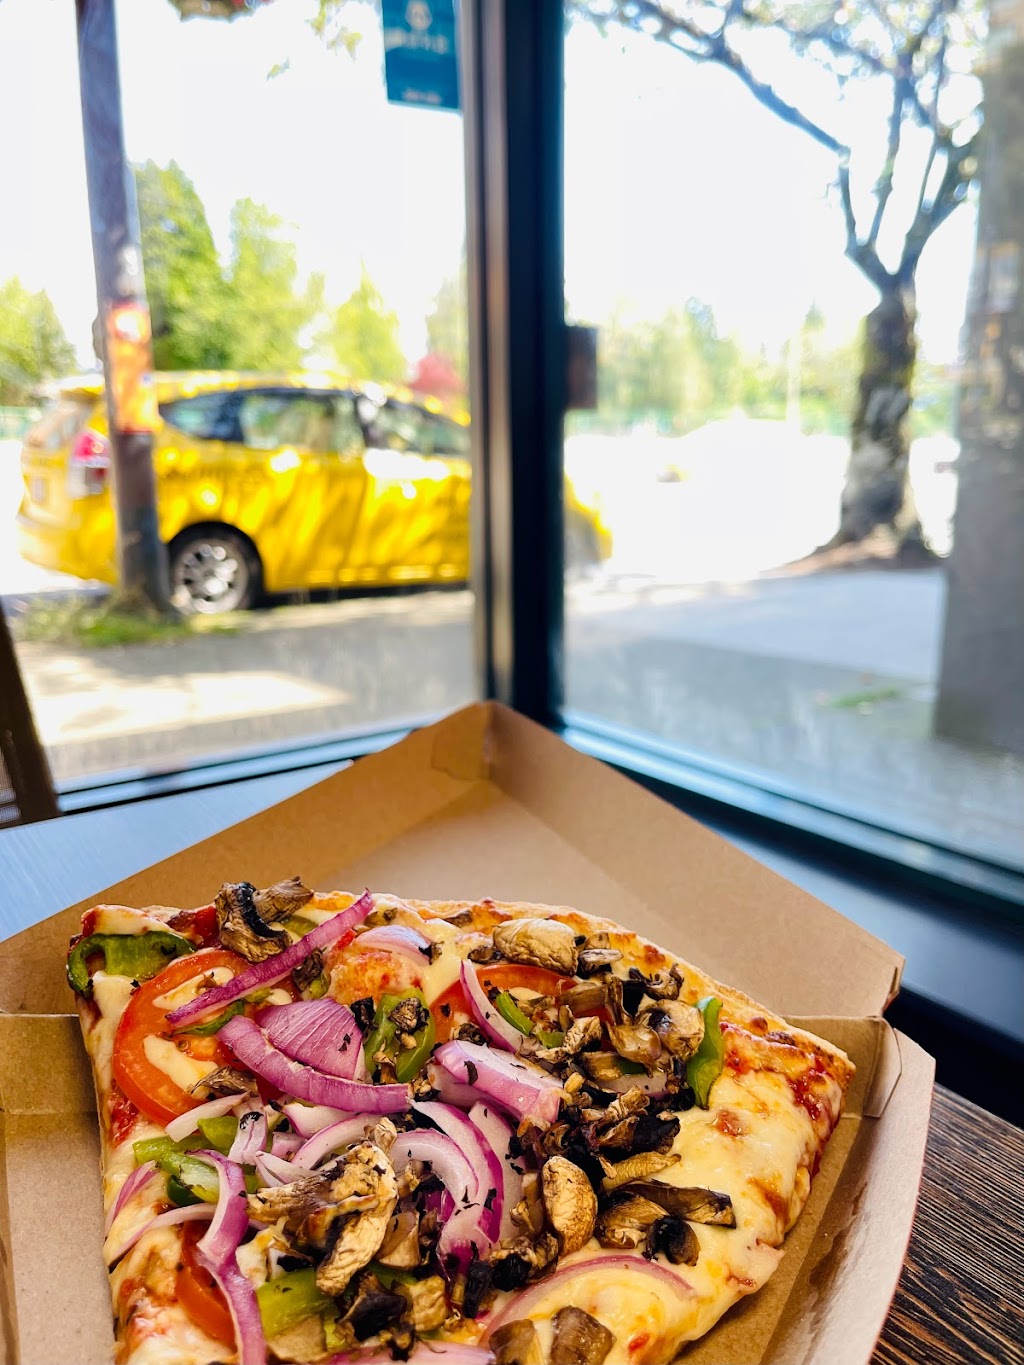 Pizza Pizza | 4580 W 10th Ave, Vancouver, BC V6R 3J1, Canada | Phone: (604) 277-1111